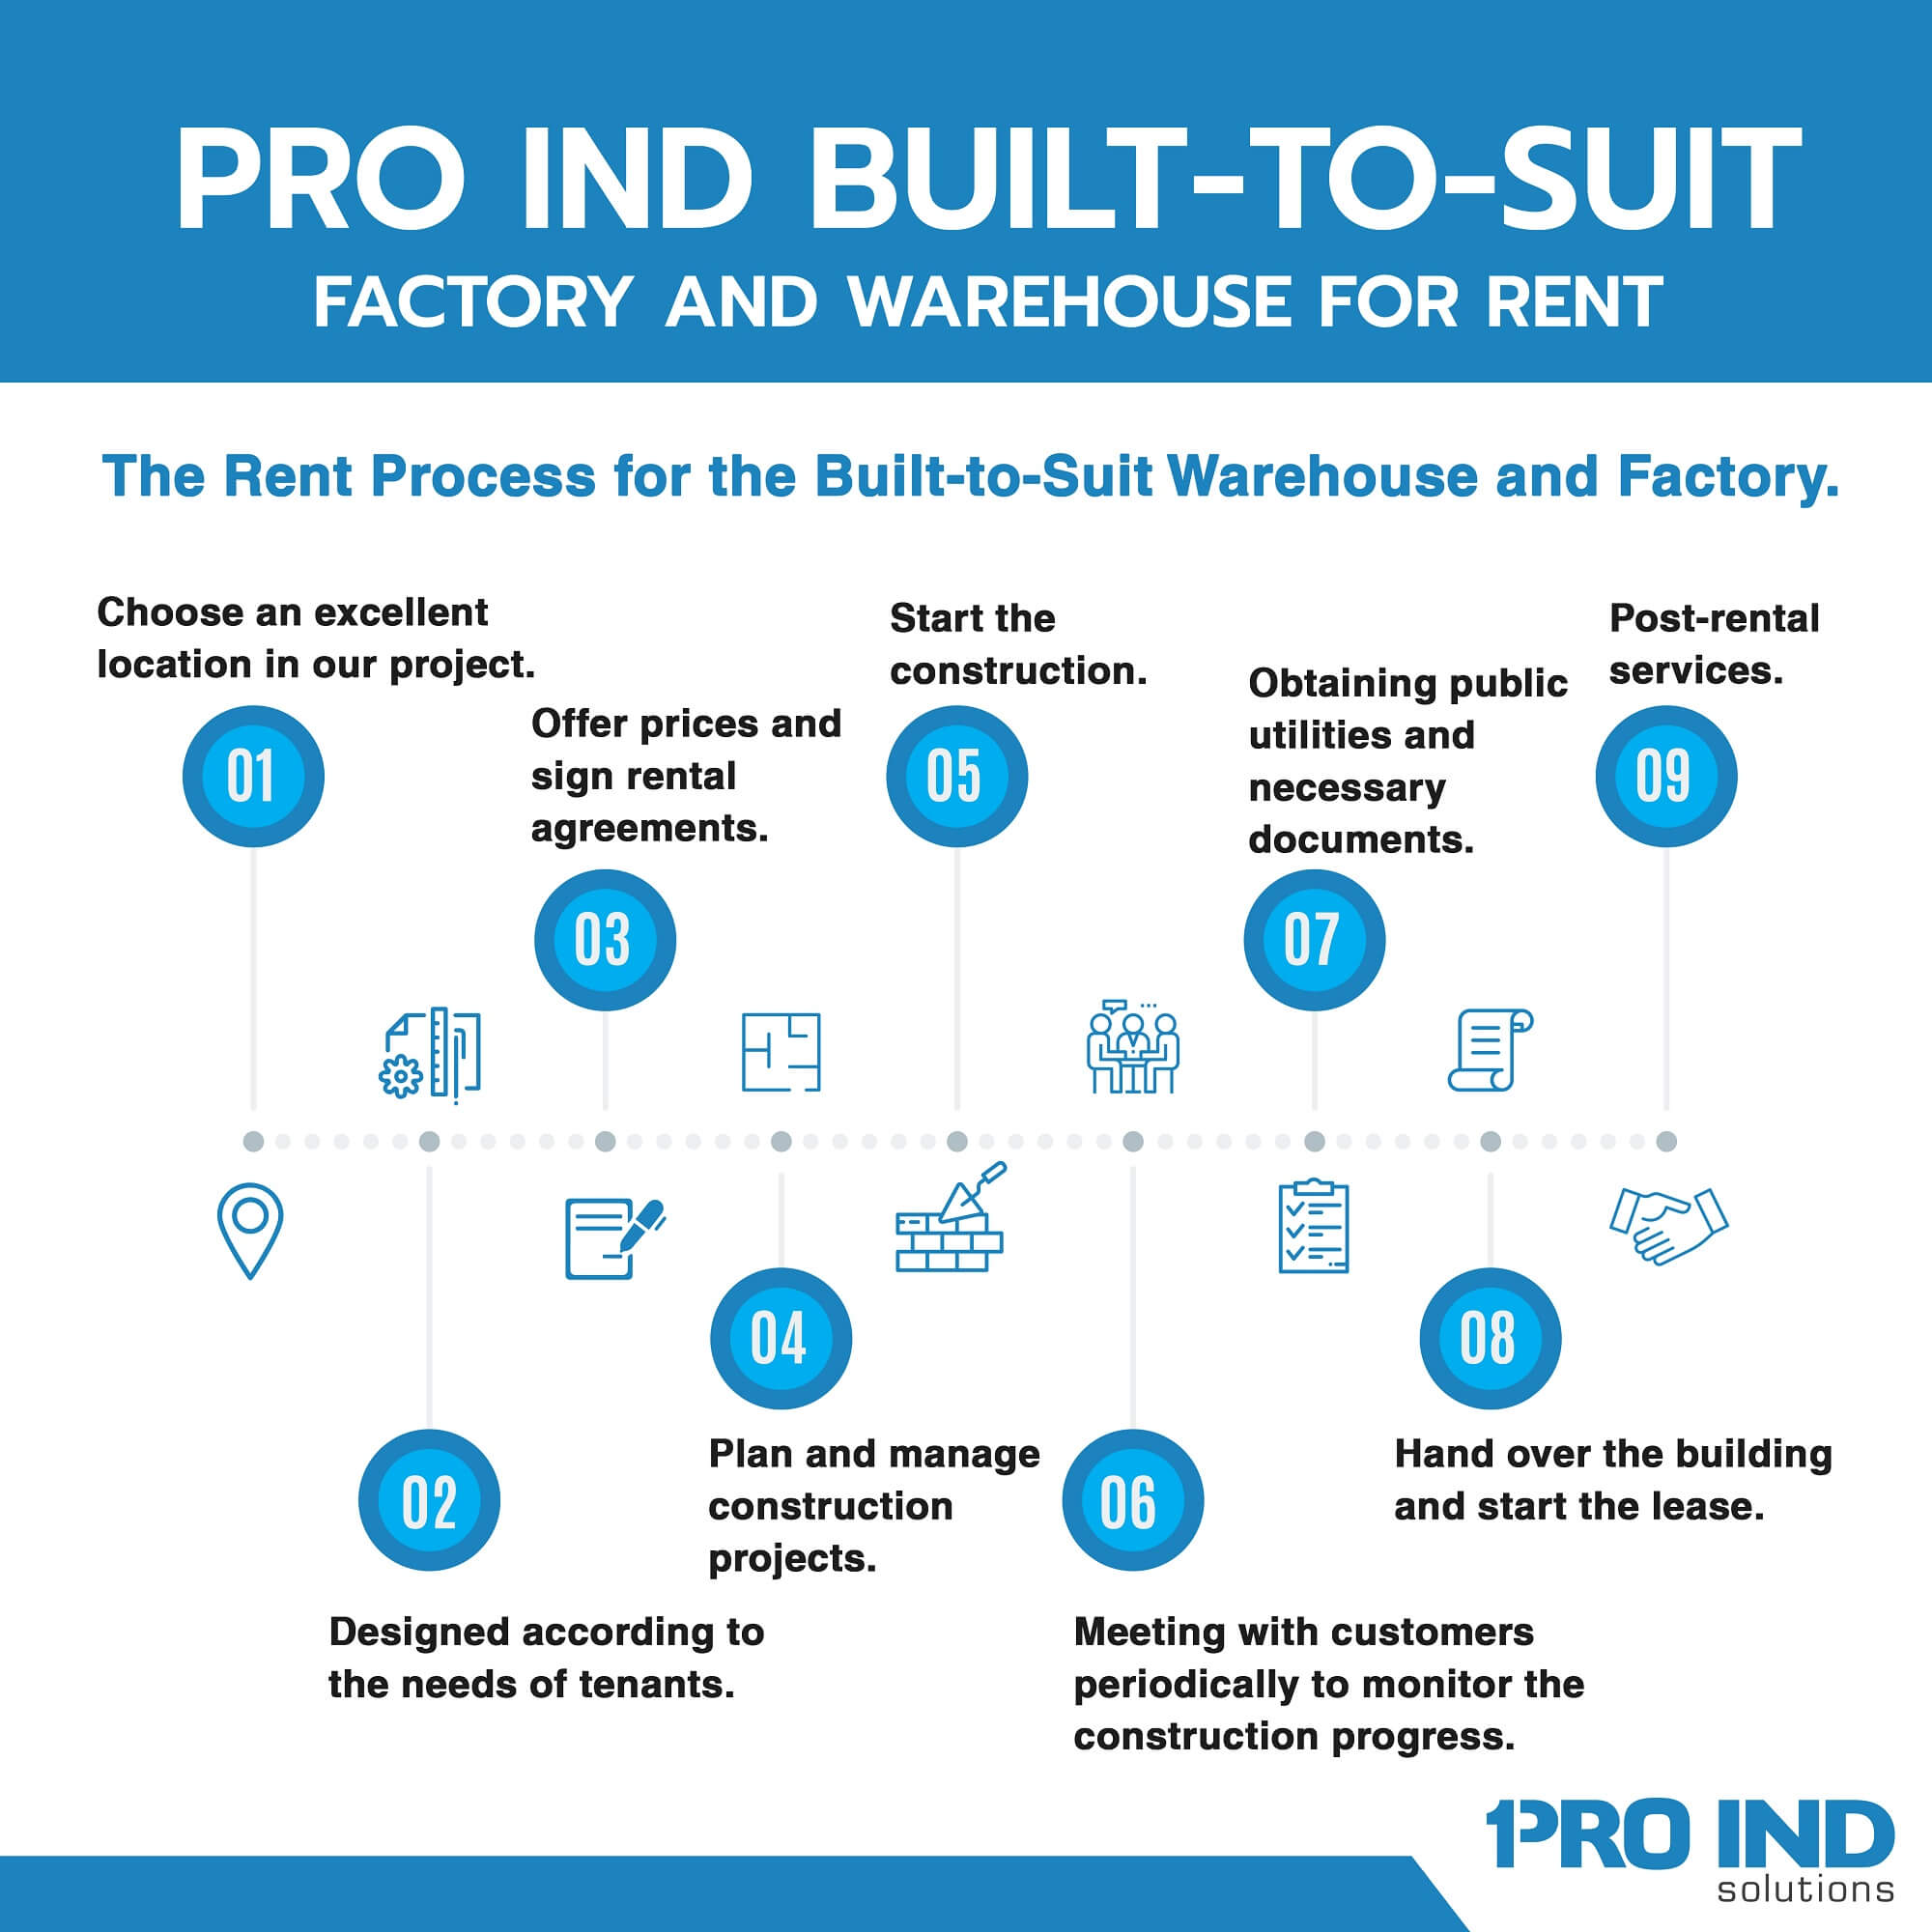 Pro Ind Factory and Warehouse for Rent